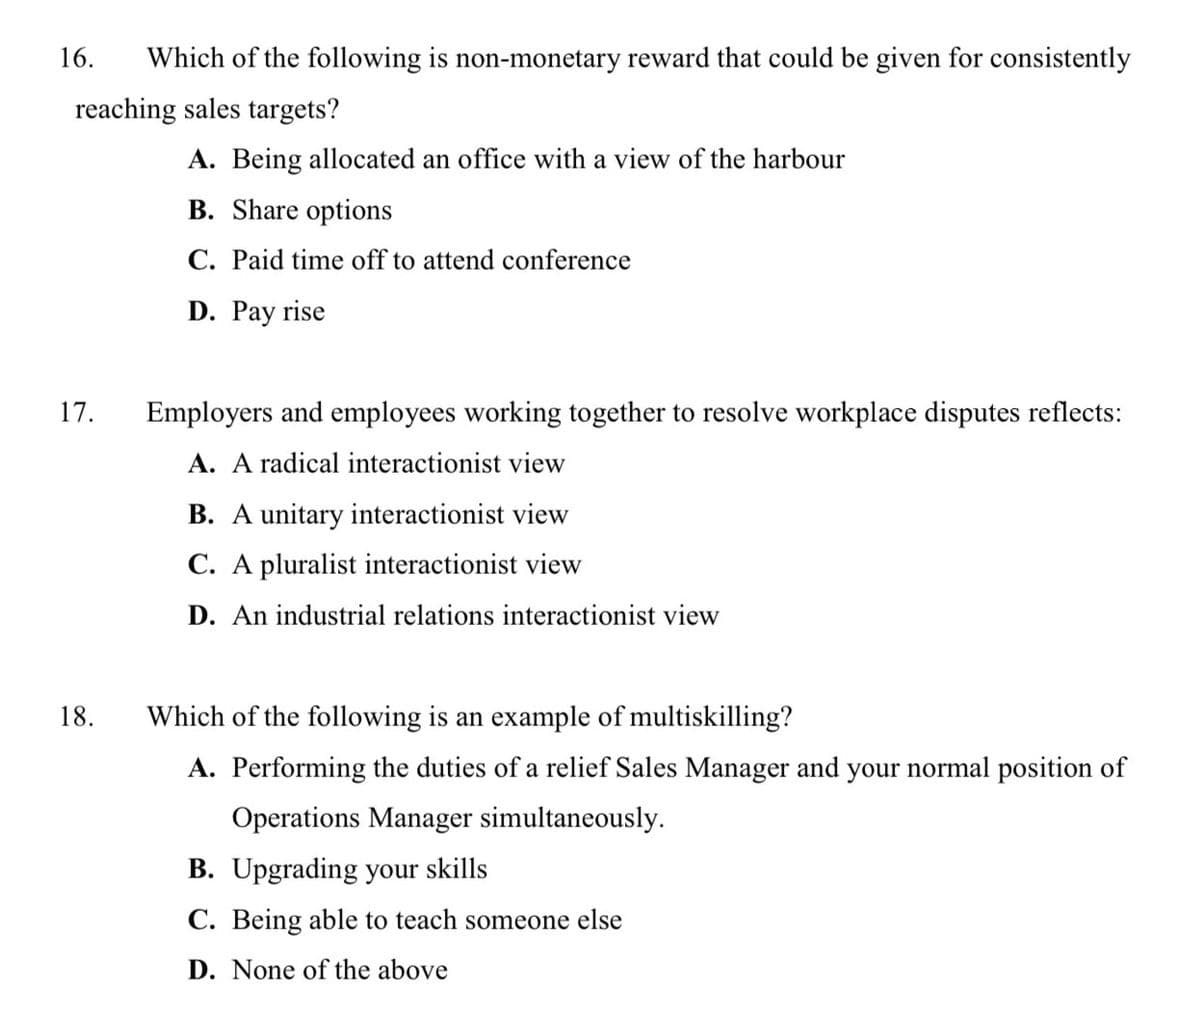 16.
Which of the following is non-monetary reward that could be given for consistently
reaching sales targets?
A. Being allocated an office with a view of the harbour
B. Share options
C. Paid time off to attend conference
D. Pay rise
17.
Employers and employees working together to resolve workplace disputes reflects:
A. A radical interactionist view
B. A unitary interactionist view
C. A pluralist interactionist view
D. An industrial relations interactionist view
18.
Which of the following is an example of multiskilling?
A. Performing the duties of a relief Sales Manager and your normal position of
Operations Manager simultaneously.
B. Upgrading your skills
C. Being able to teach someone else
D. None of the above
